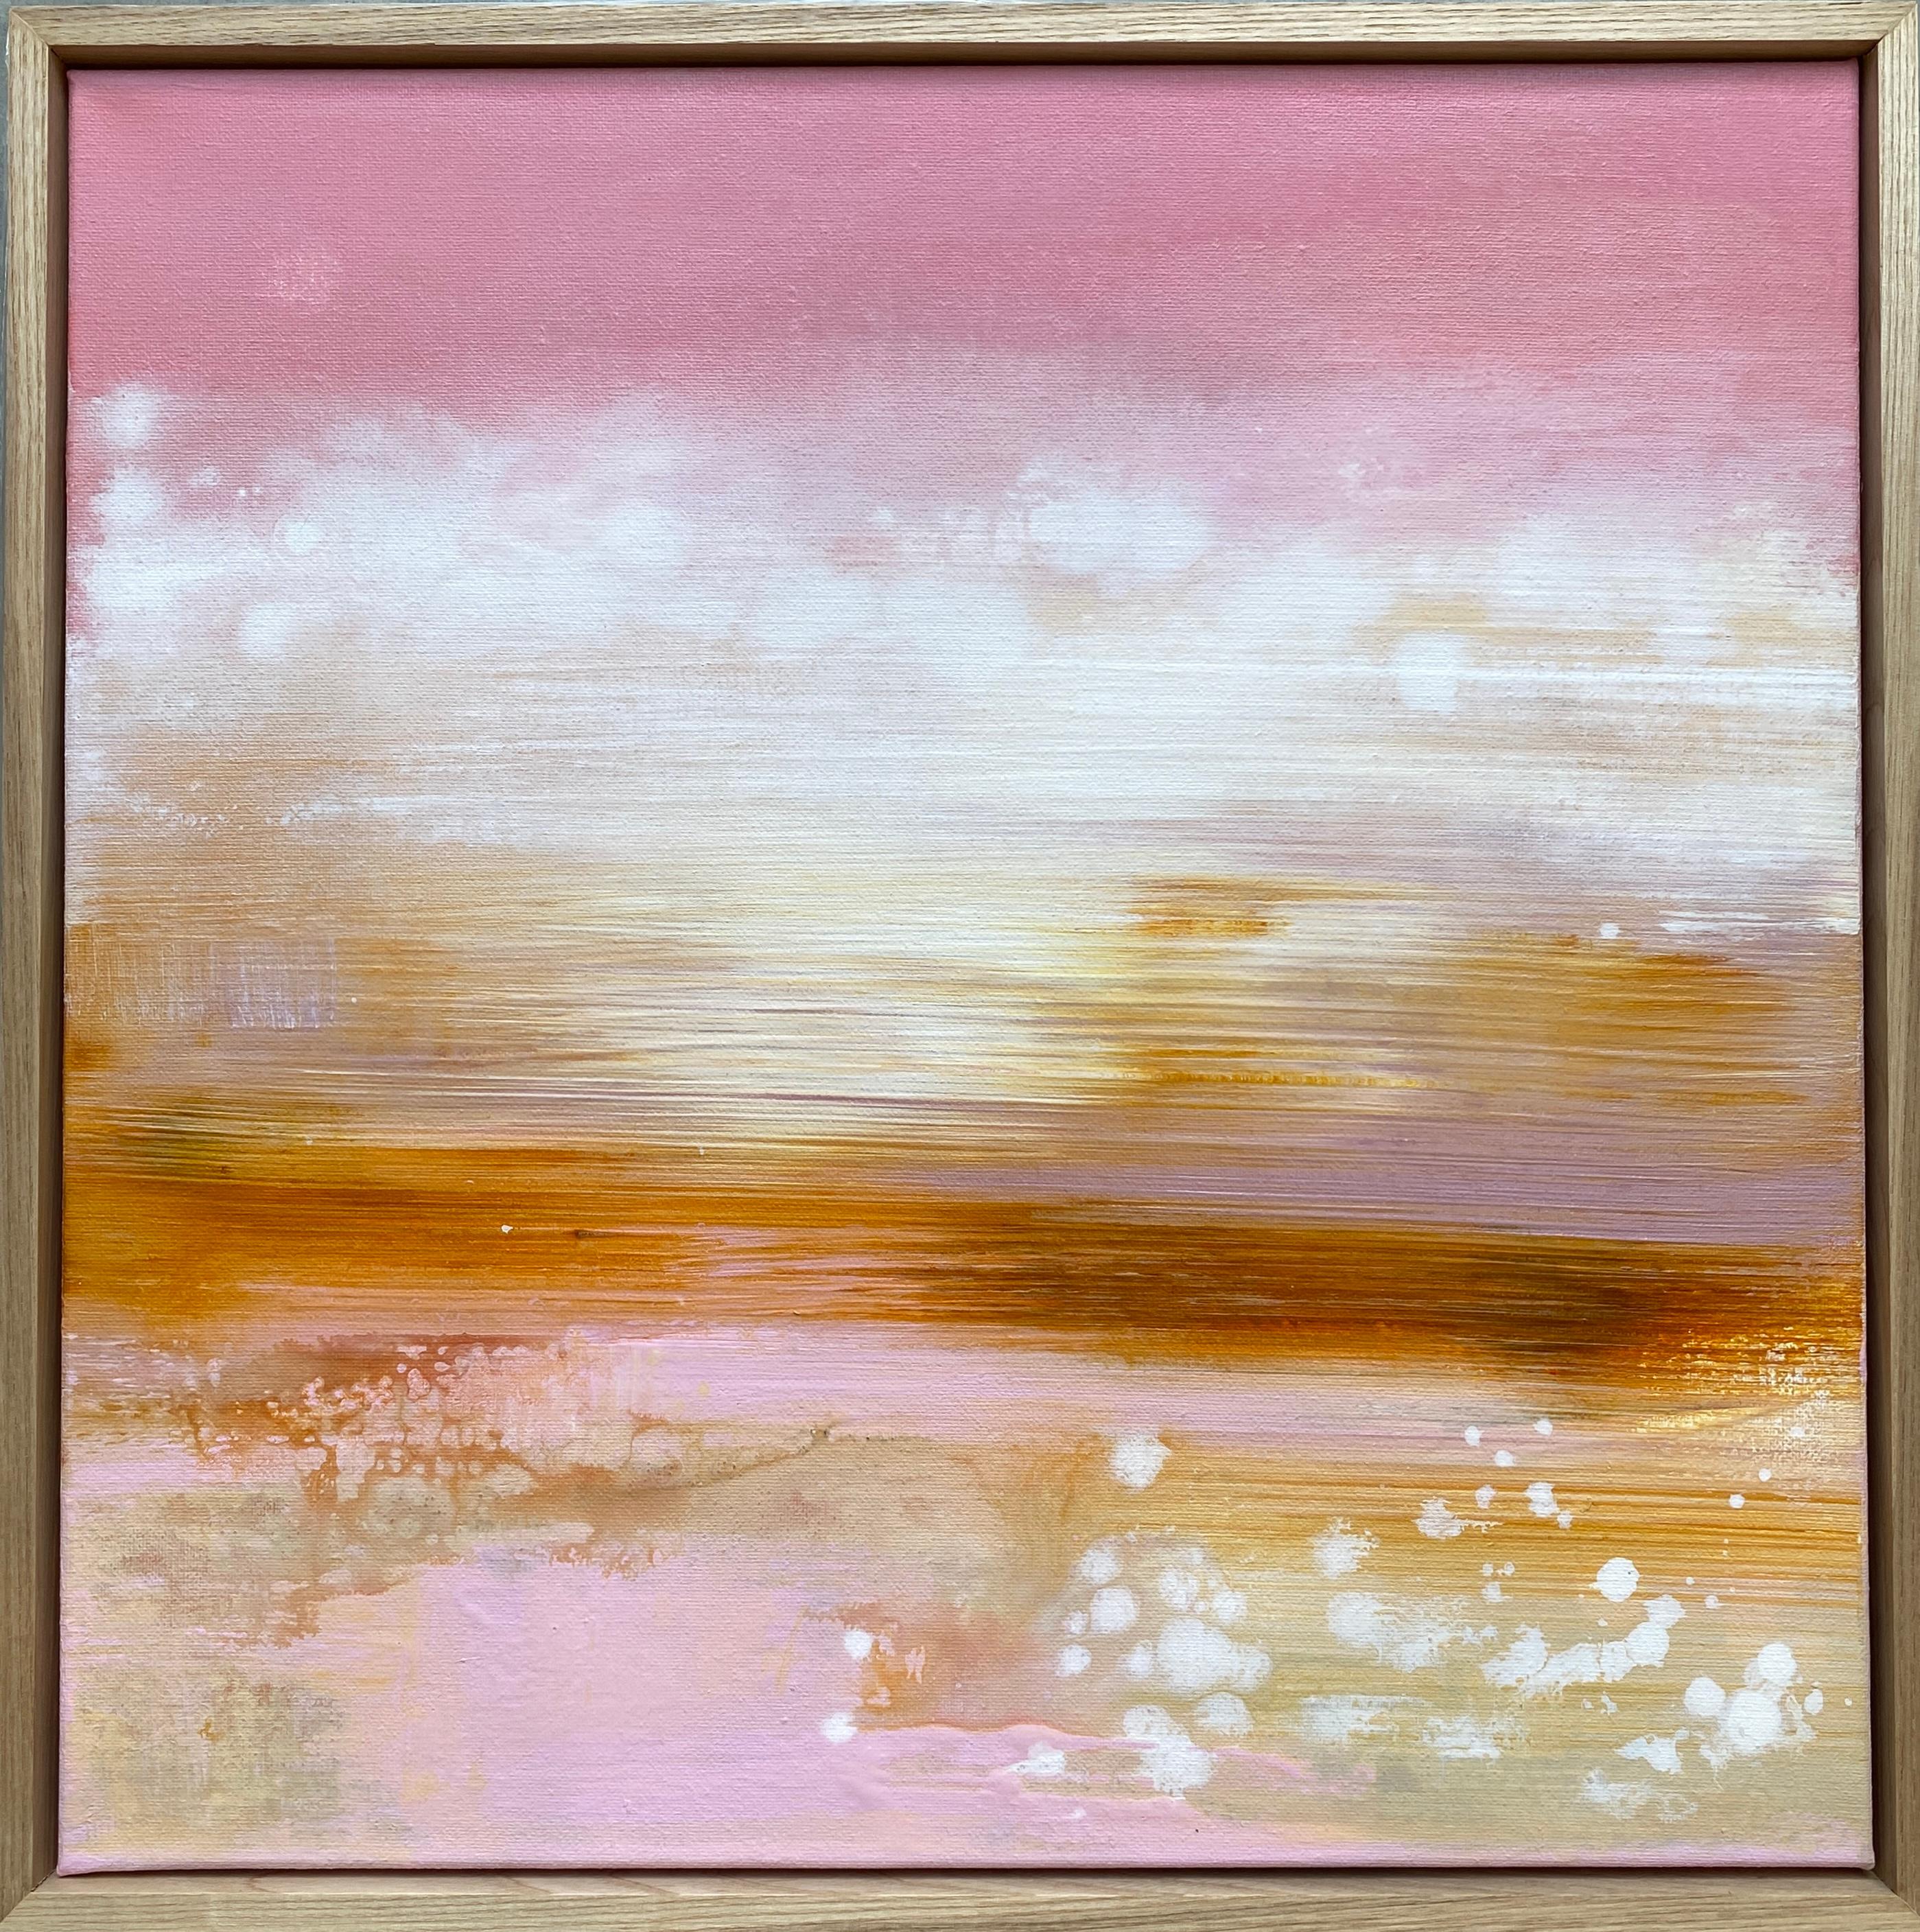 Abstract Painting Kathleen Rhee - Sweet Home encadré, paysage expressionniste abstrait impressionniste rose pêche 